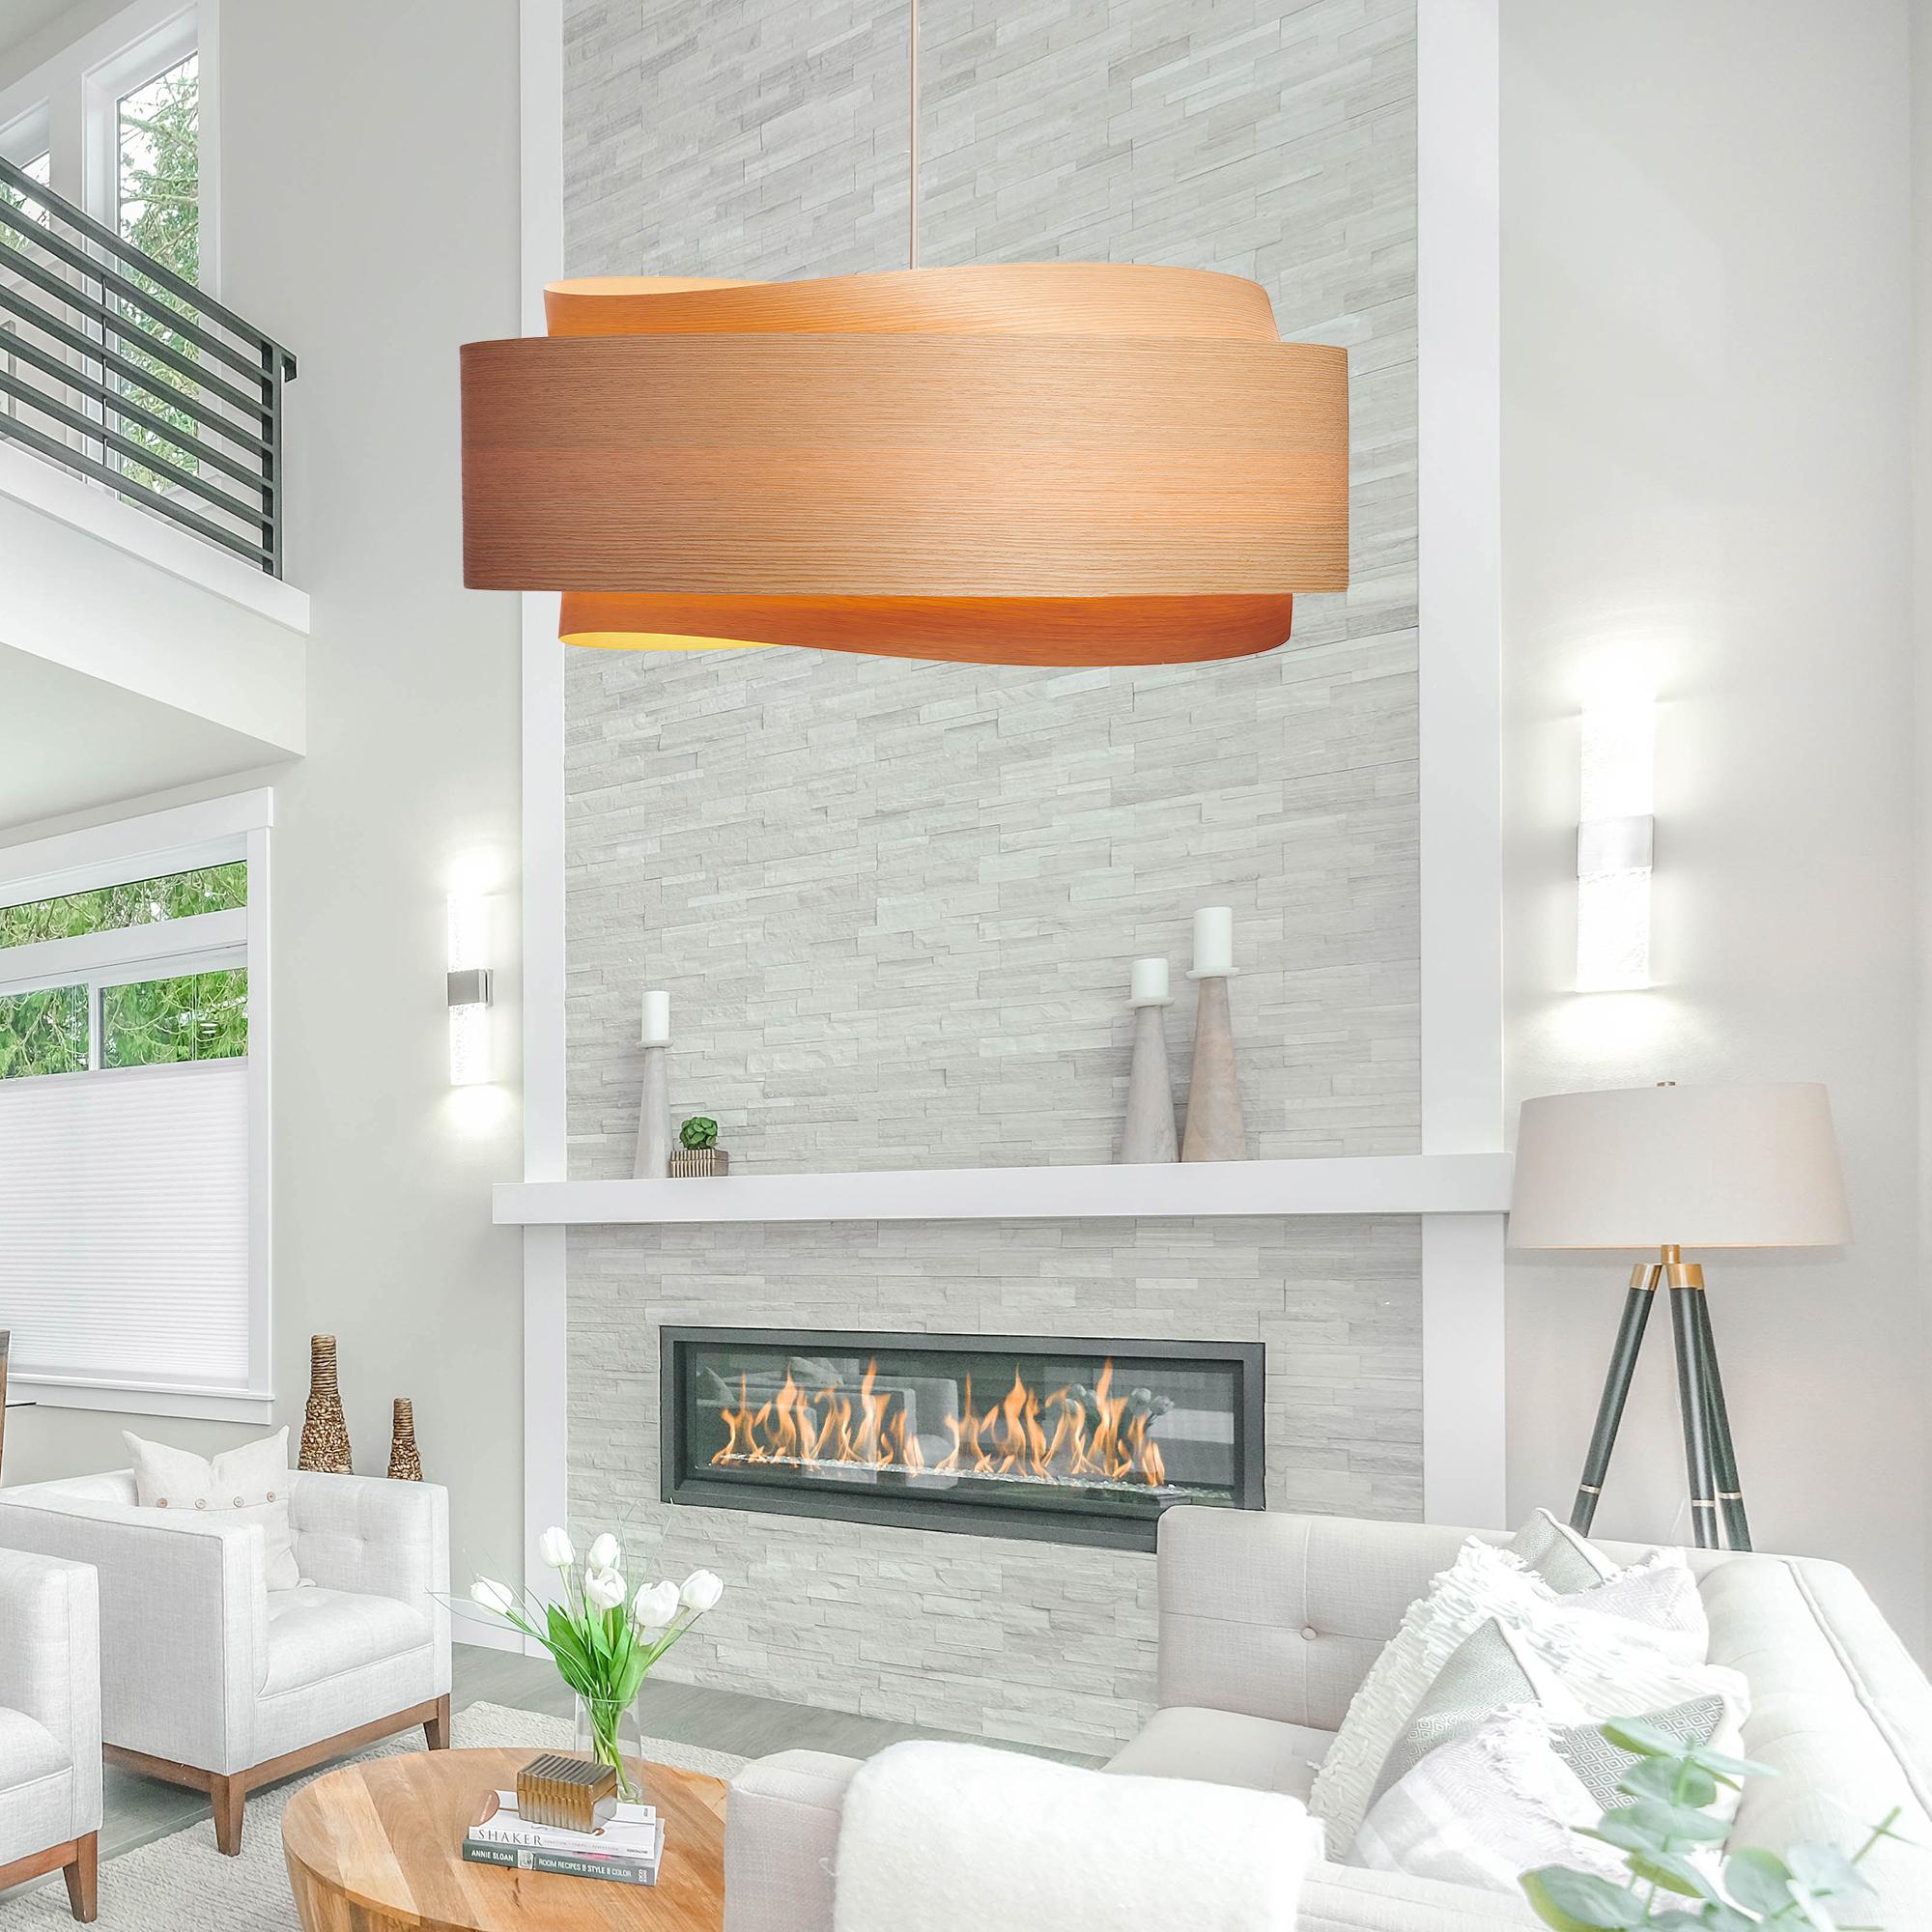 The BOWEN light fixture is a stunning example of contemporary Mid-Century Modern design. With its minimalist silhouette, warm wood tones, and unique shape, this pendant light is sure to add a touch of sophistication to any space.

The BOWEN light